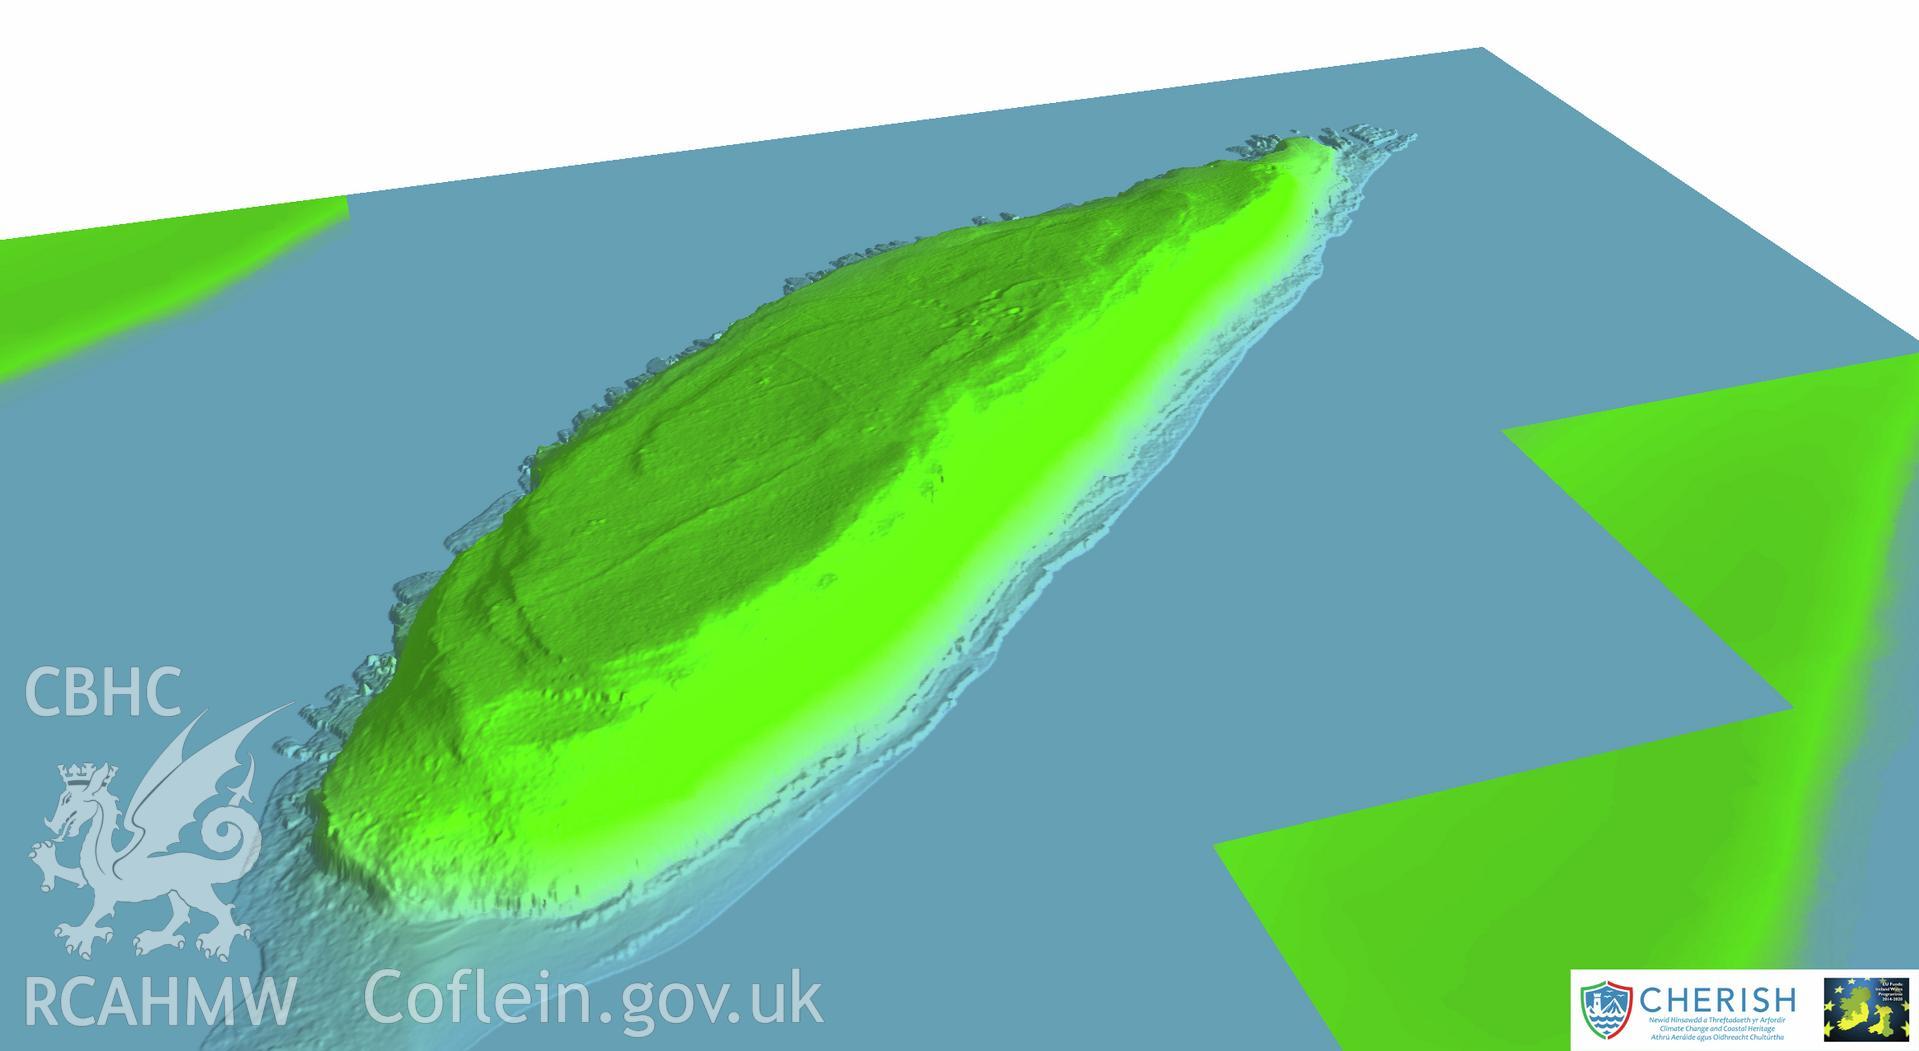 Ynys Seiriol (Puffin Island). Airborne laser scanning (LiDAR) commissioned by the CHERISH Project 2017-2021, flown by Bluesky International LTD at low tide on 24th February 2017. View of Puffin Island facing north west.